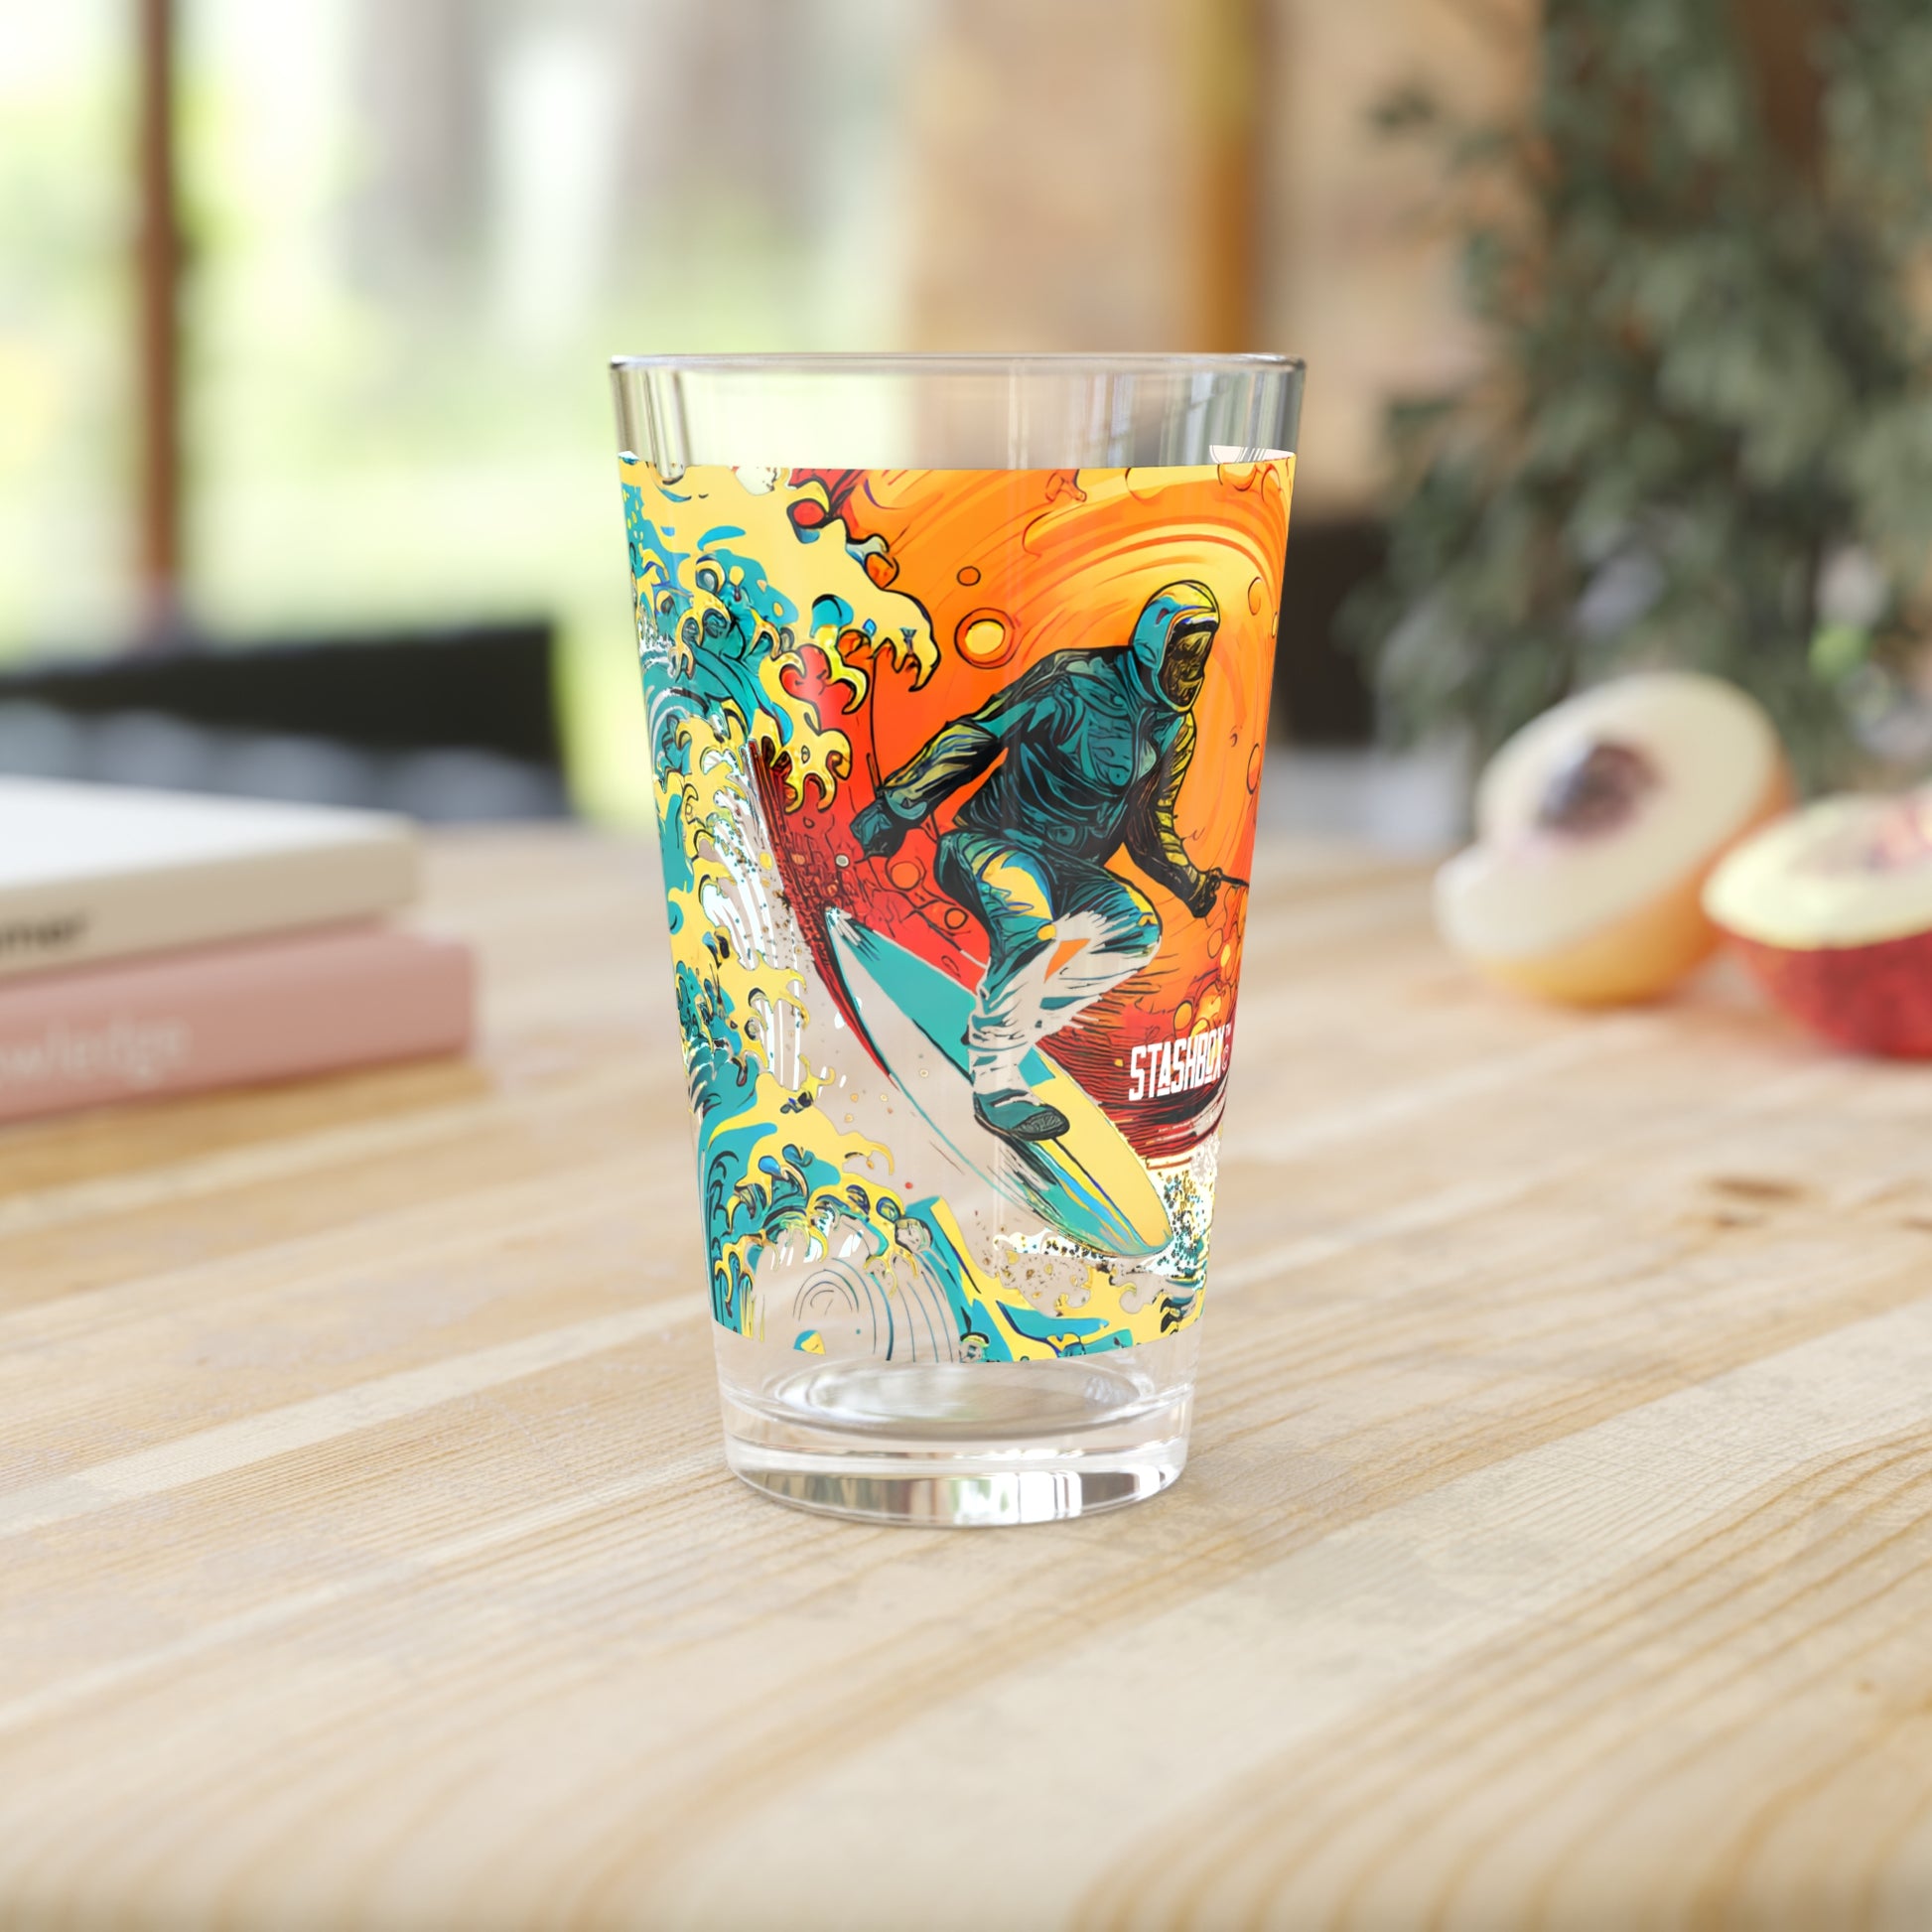 Experience the thrill of surfing the stars with our Surfing Astronaut Space Wave Pint Glass. Waves Design #067 captures the essence of space adventure and ocean waves.